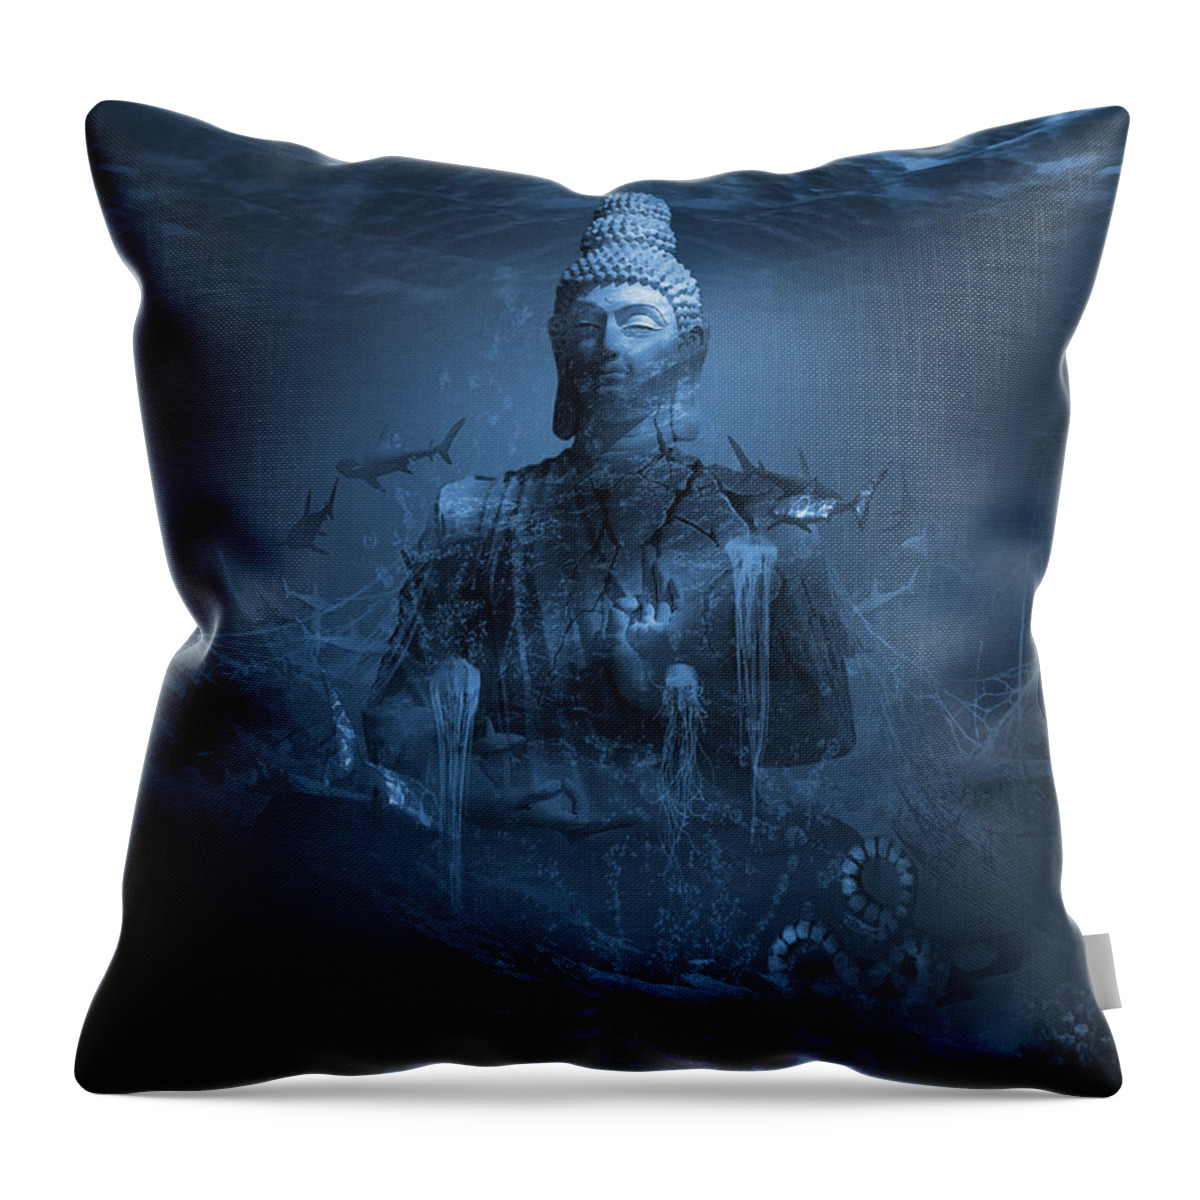 Sharks Throw Pillow featuring the digital art The Serenity Prayer or Tranquility Meditation by George Grie